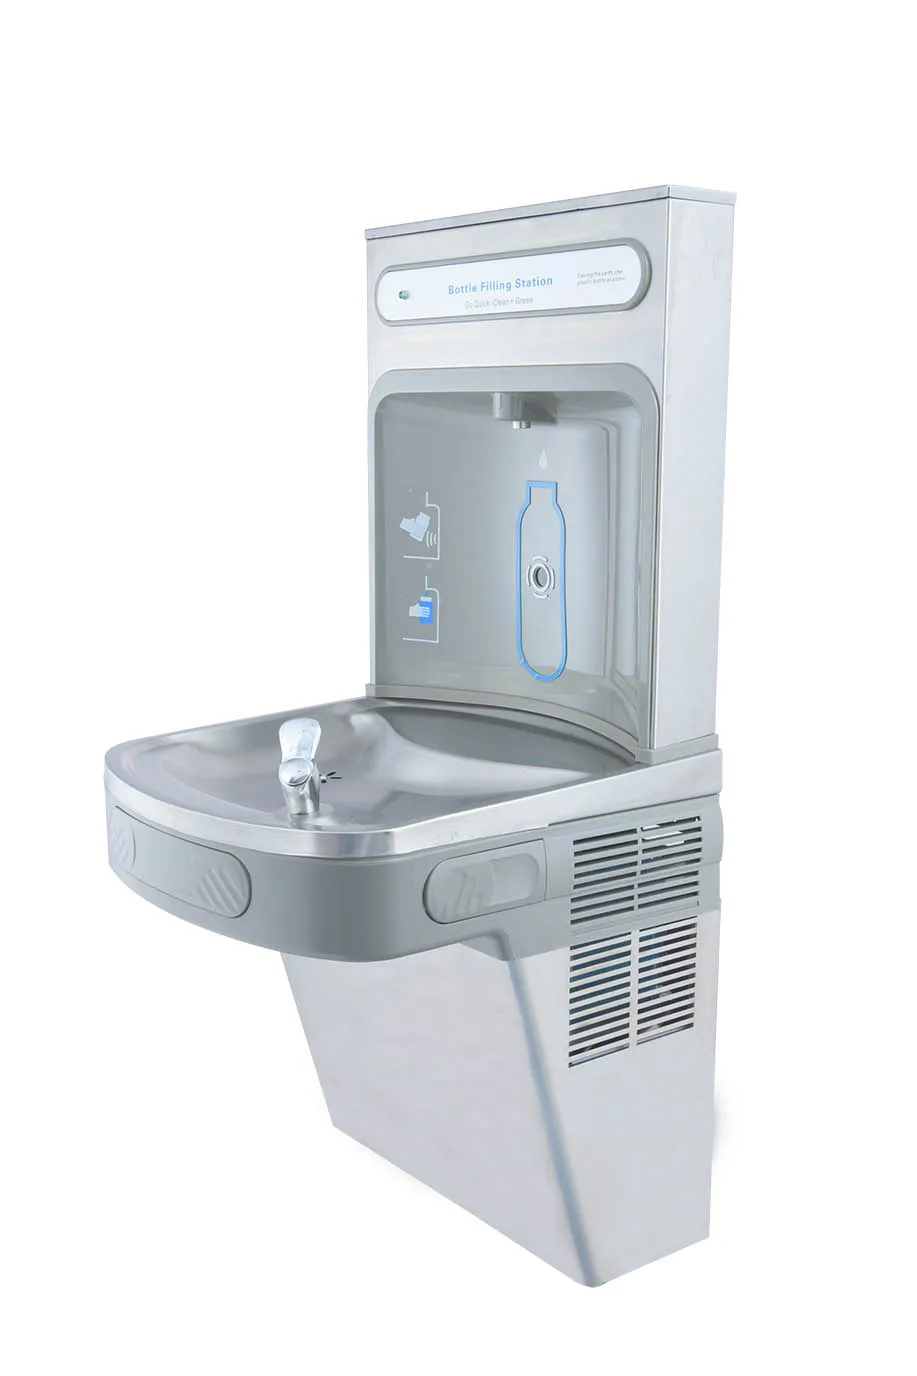 
outdoor wall mounted drinking water fountain 